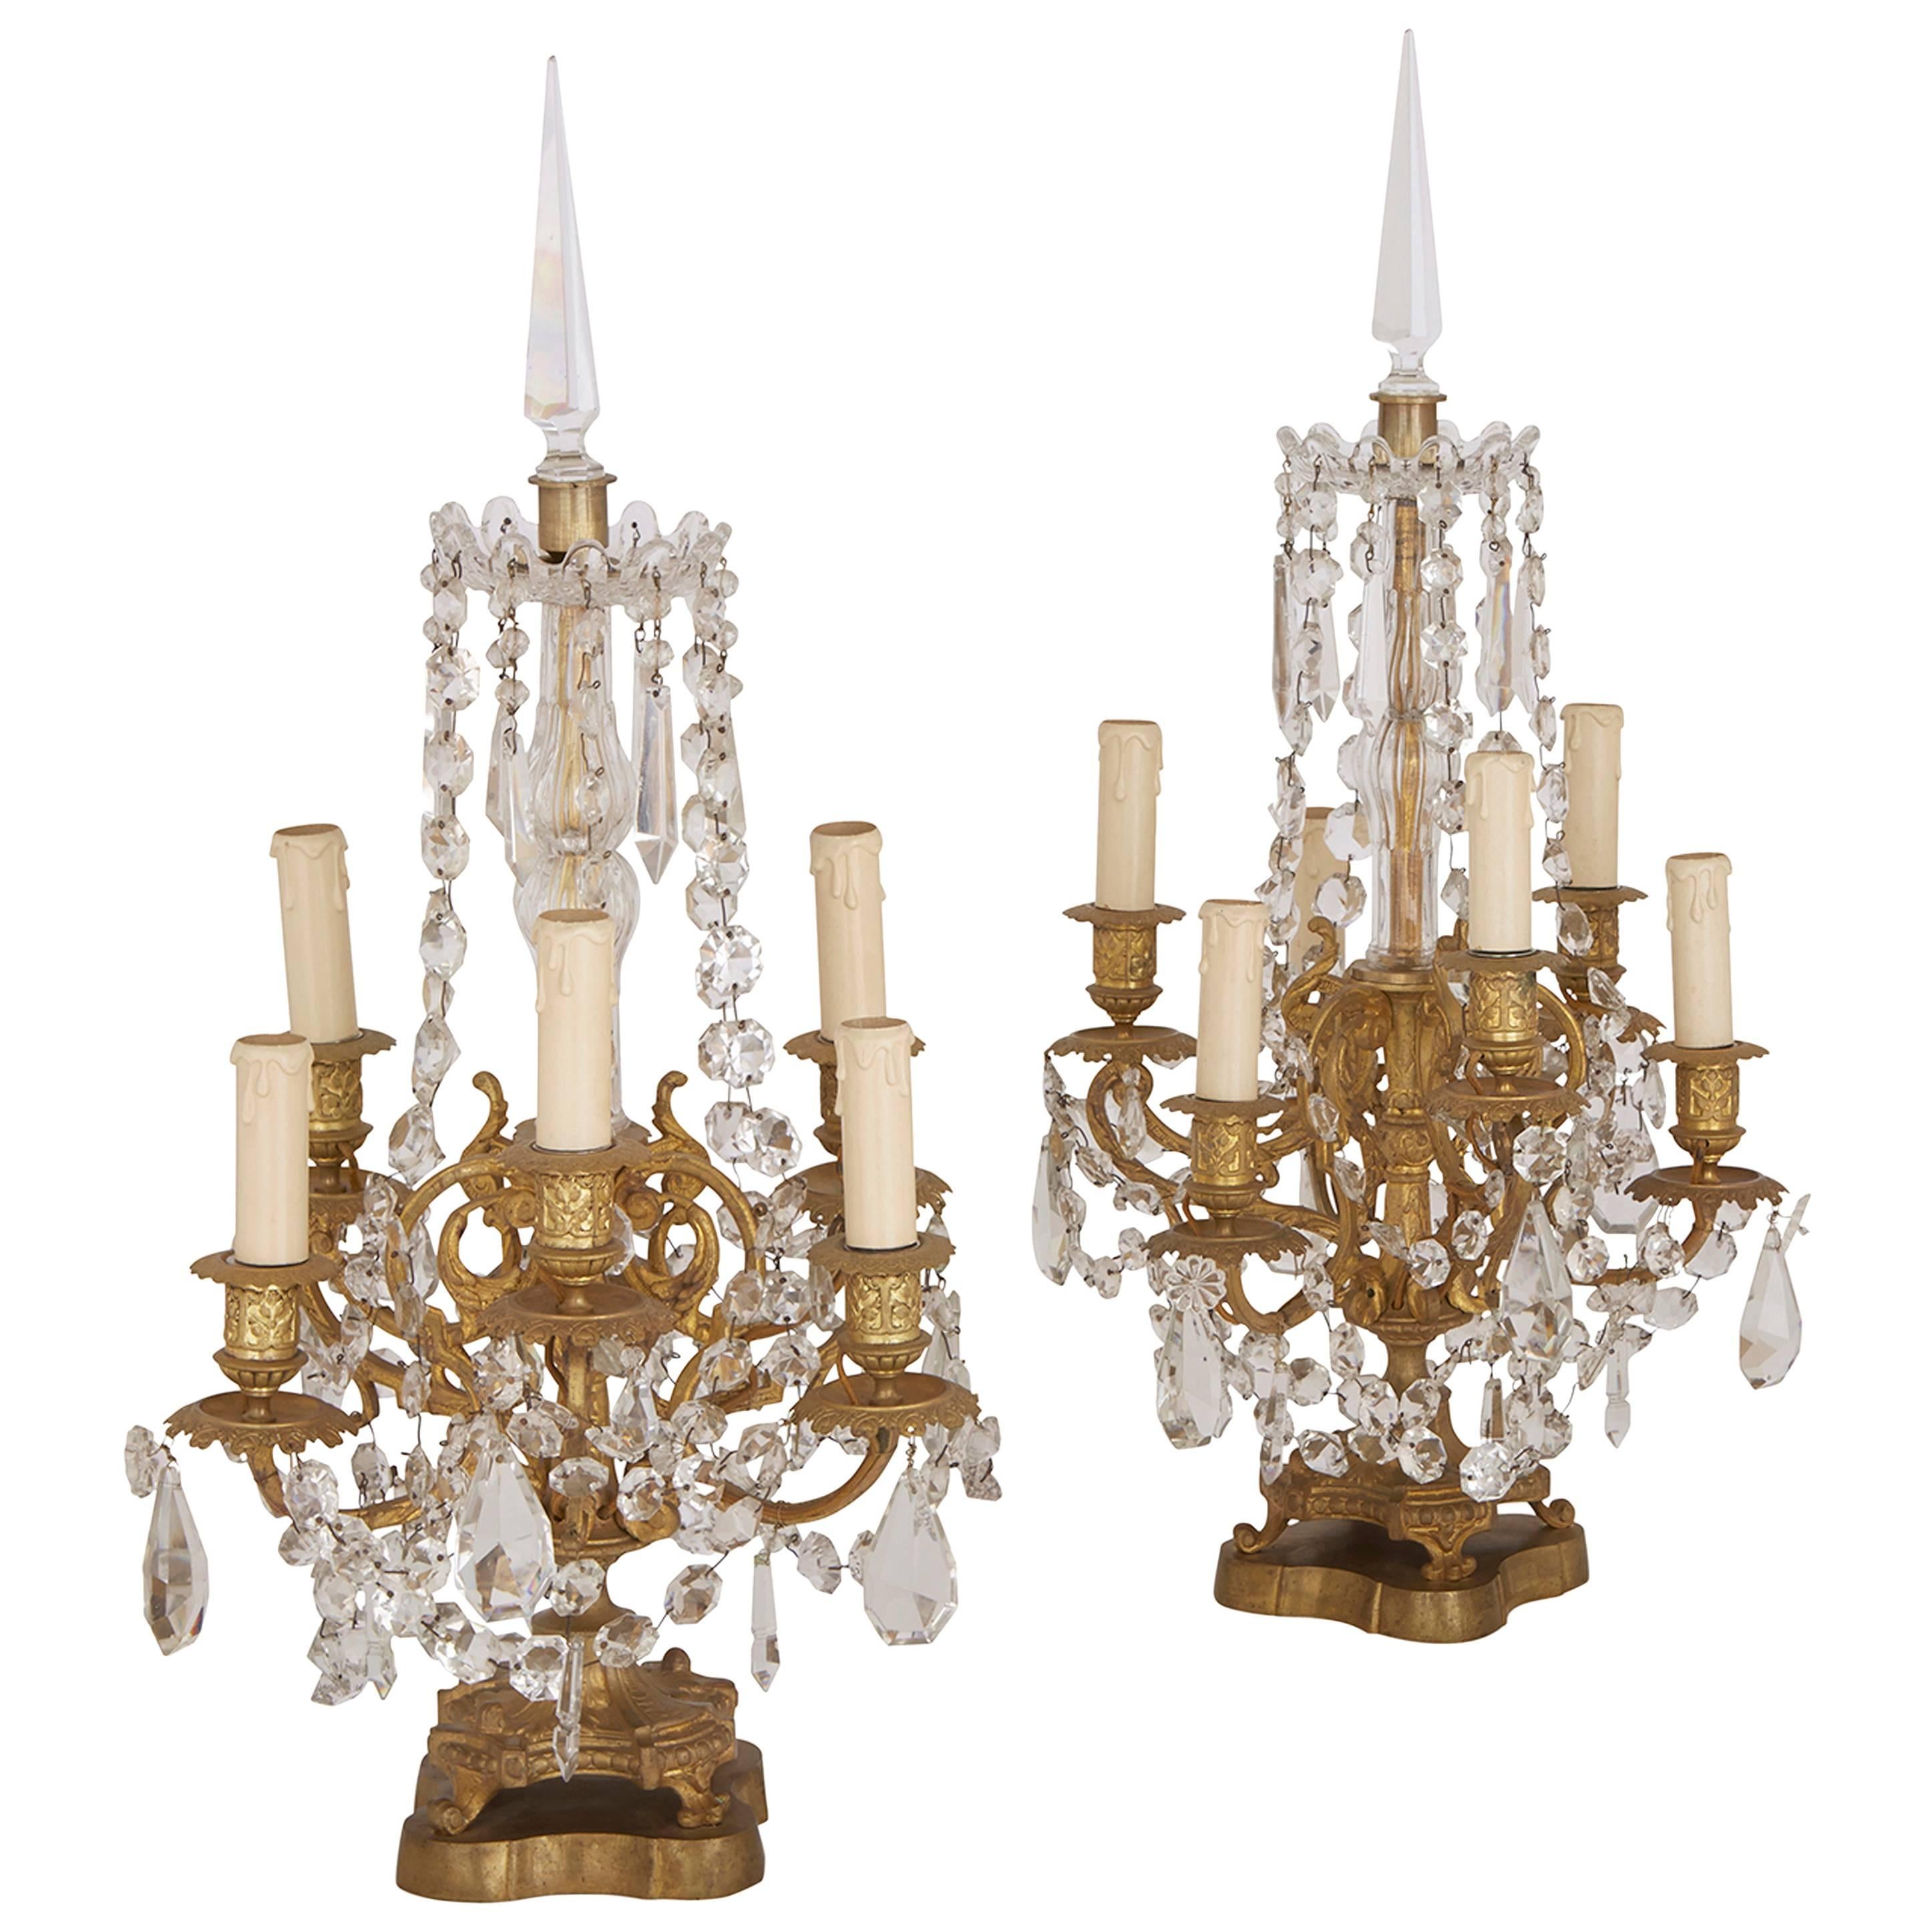 Pair of Louis XVI Style Ormolu and Cut-Glass Candelabra For Sale